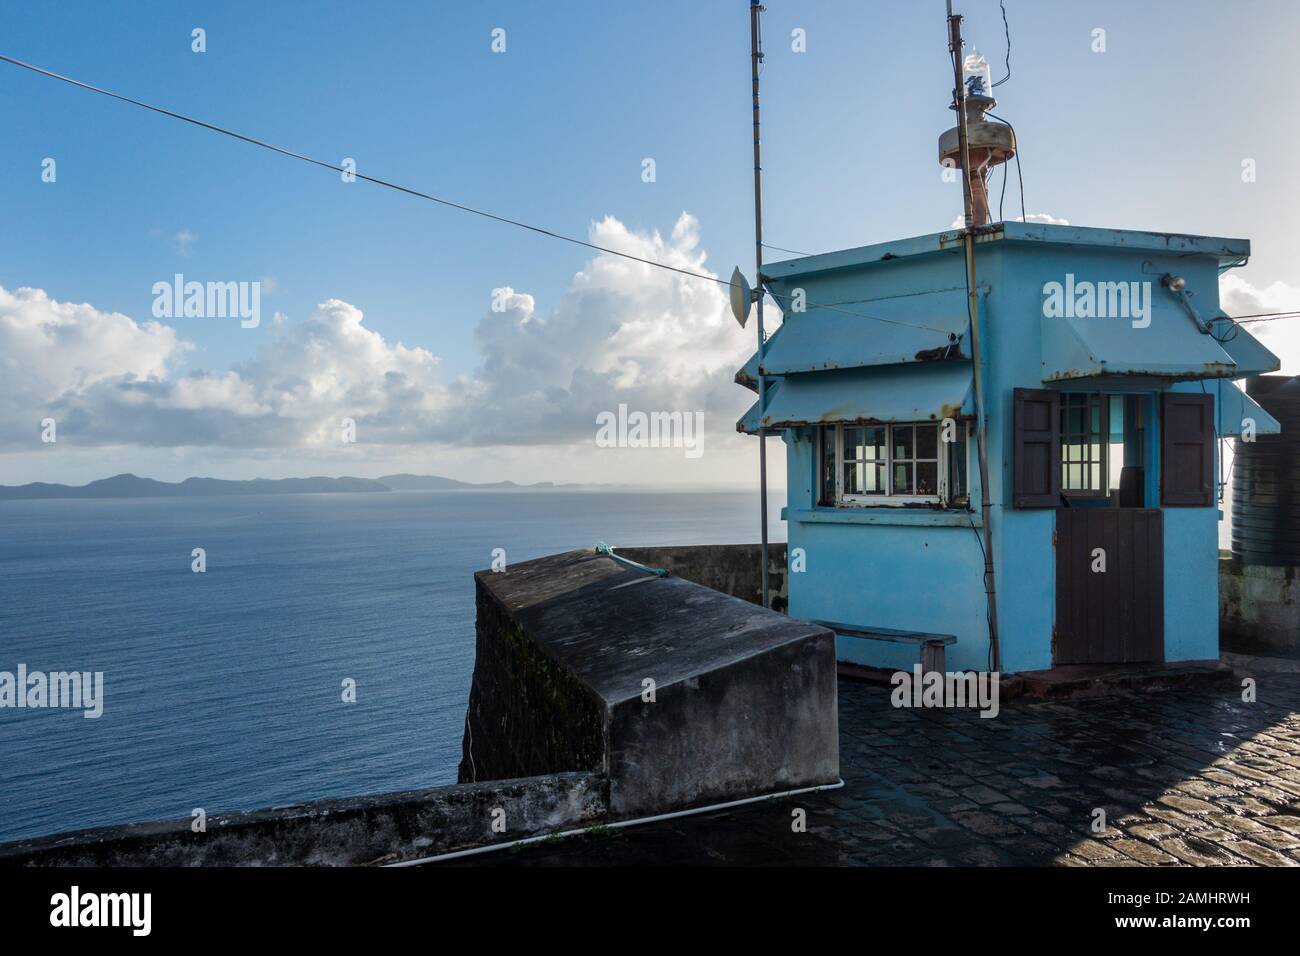 Fort Charlotte Light Lighthouse, Kingstown, Saint Vincent and the Grenadines, West Indies, Caribbean. Stock Photo